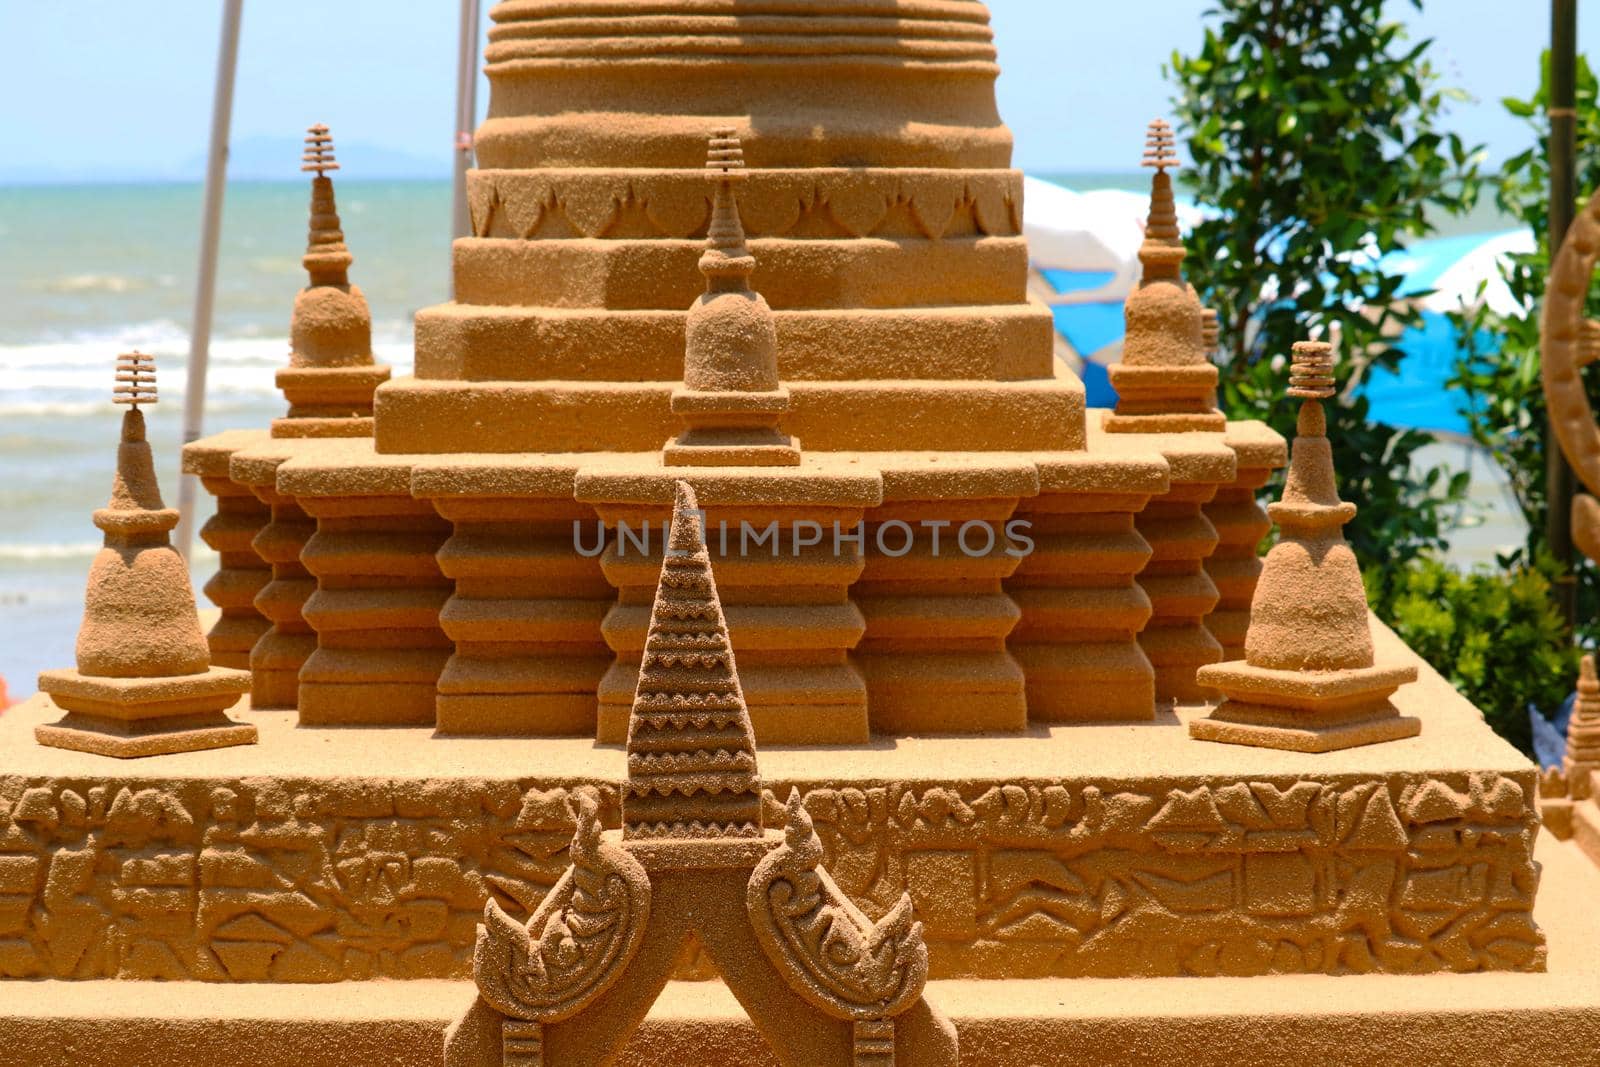 detail of sand pagoda in Songkran festival represents In order to take the sand scraps attached to the feet from the temple to return the temple in the shape of a sand pagoda